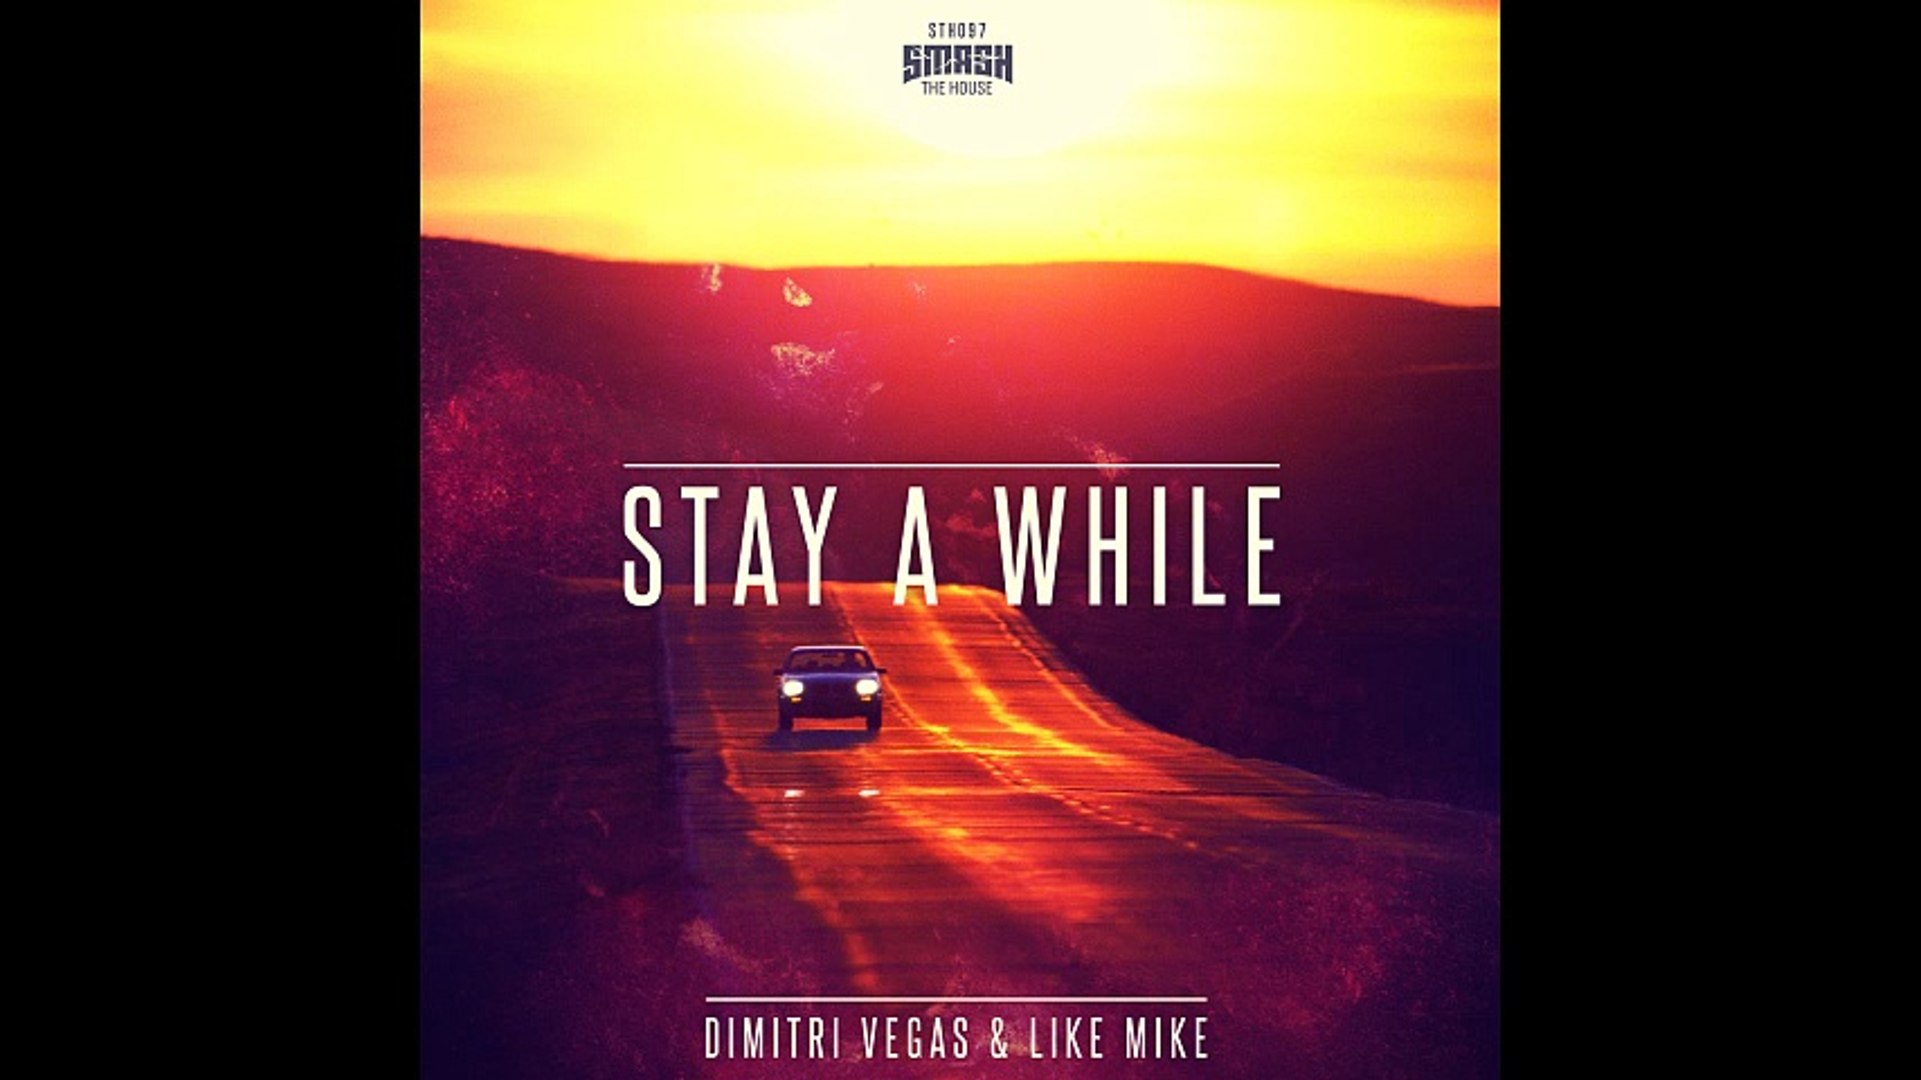 Dimitri Vegas & Like Mike - Stay a While (Radio Edit) - Video Dailymotion